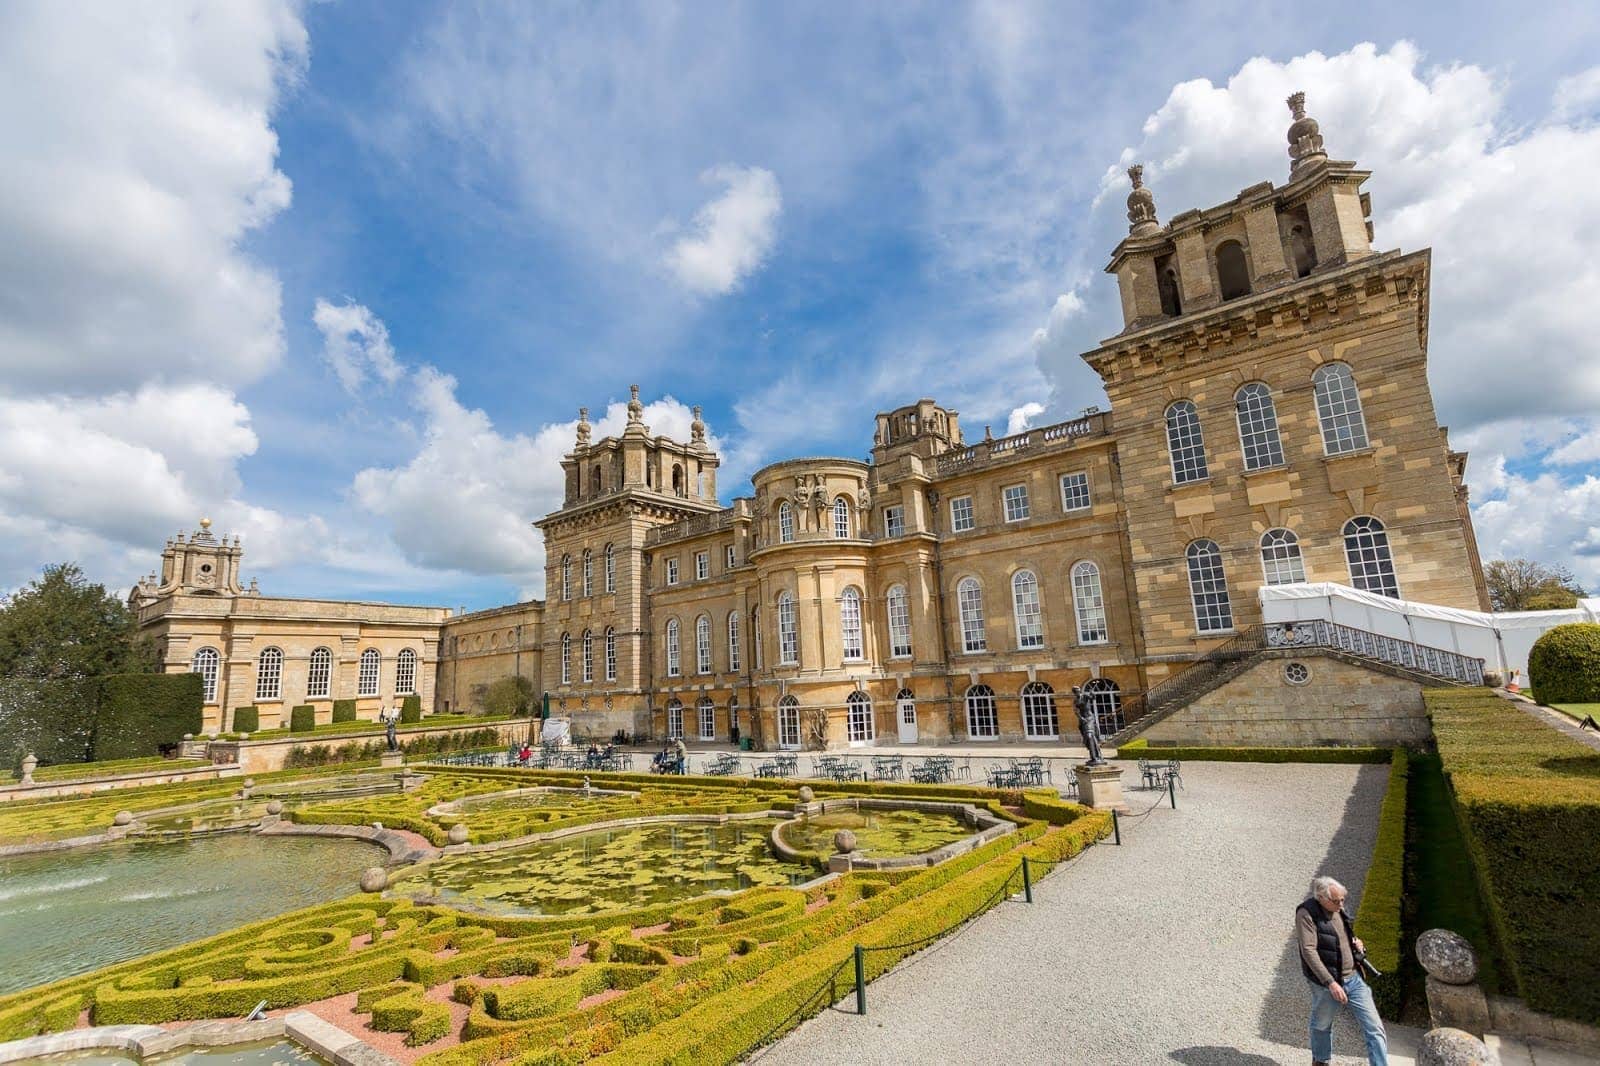 Stately Homes in England - Blenheim Palace by Laurence Norah